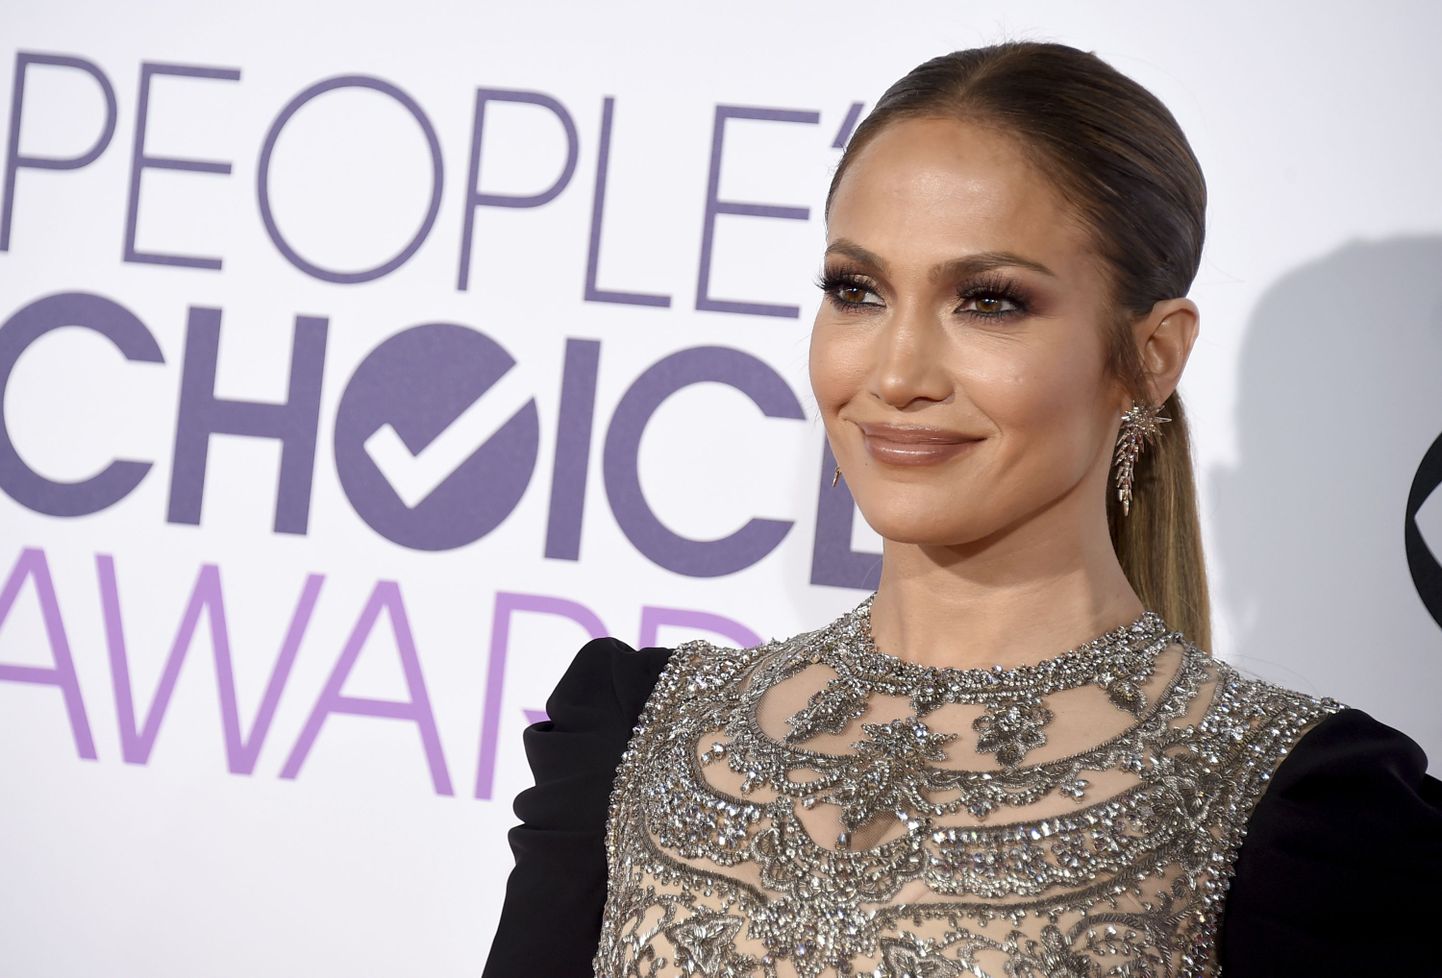 Jennifer Lopez arrives at the People's Choice Awards at the Microsoft Theater on Wednesday, Jan. 18, 2017, in Los Angeles. (Photo by Jordan Strauss/Invision/AP)